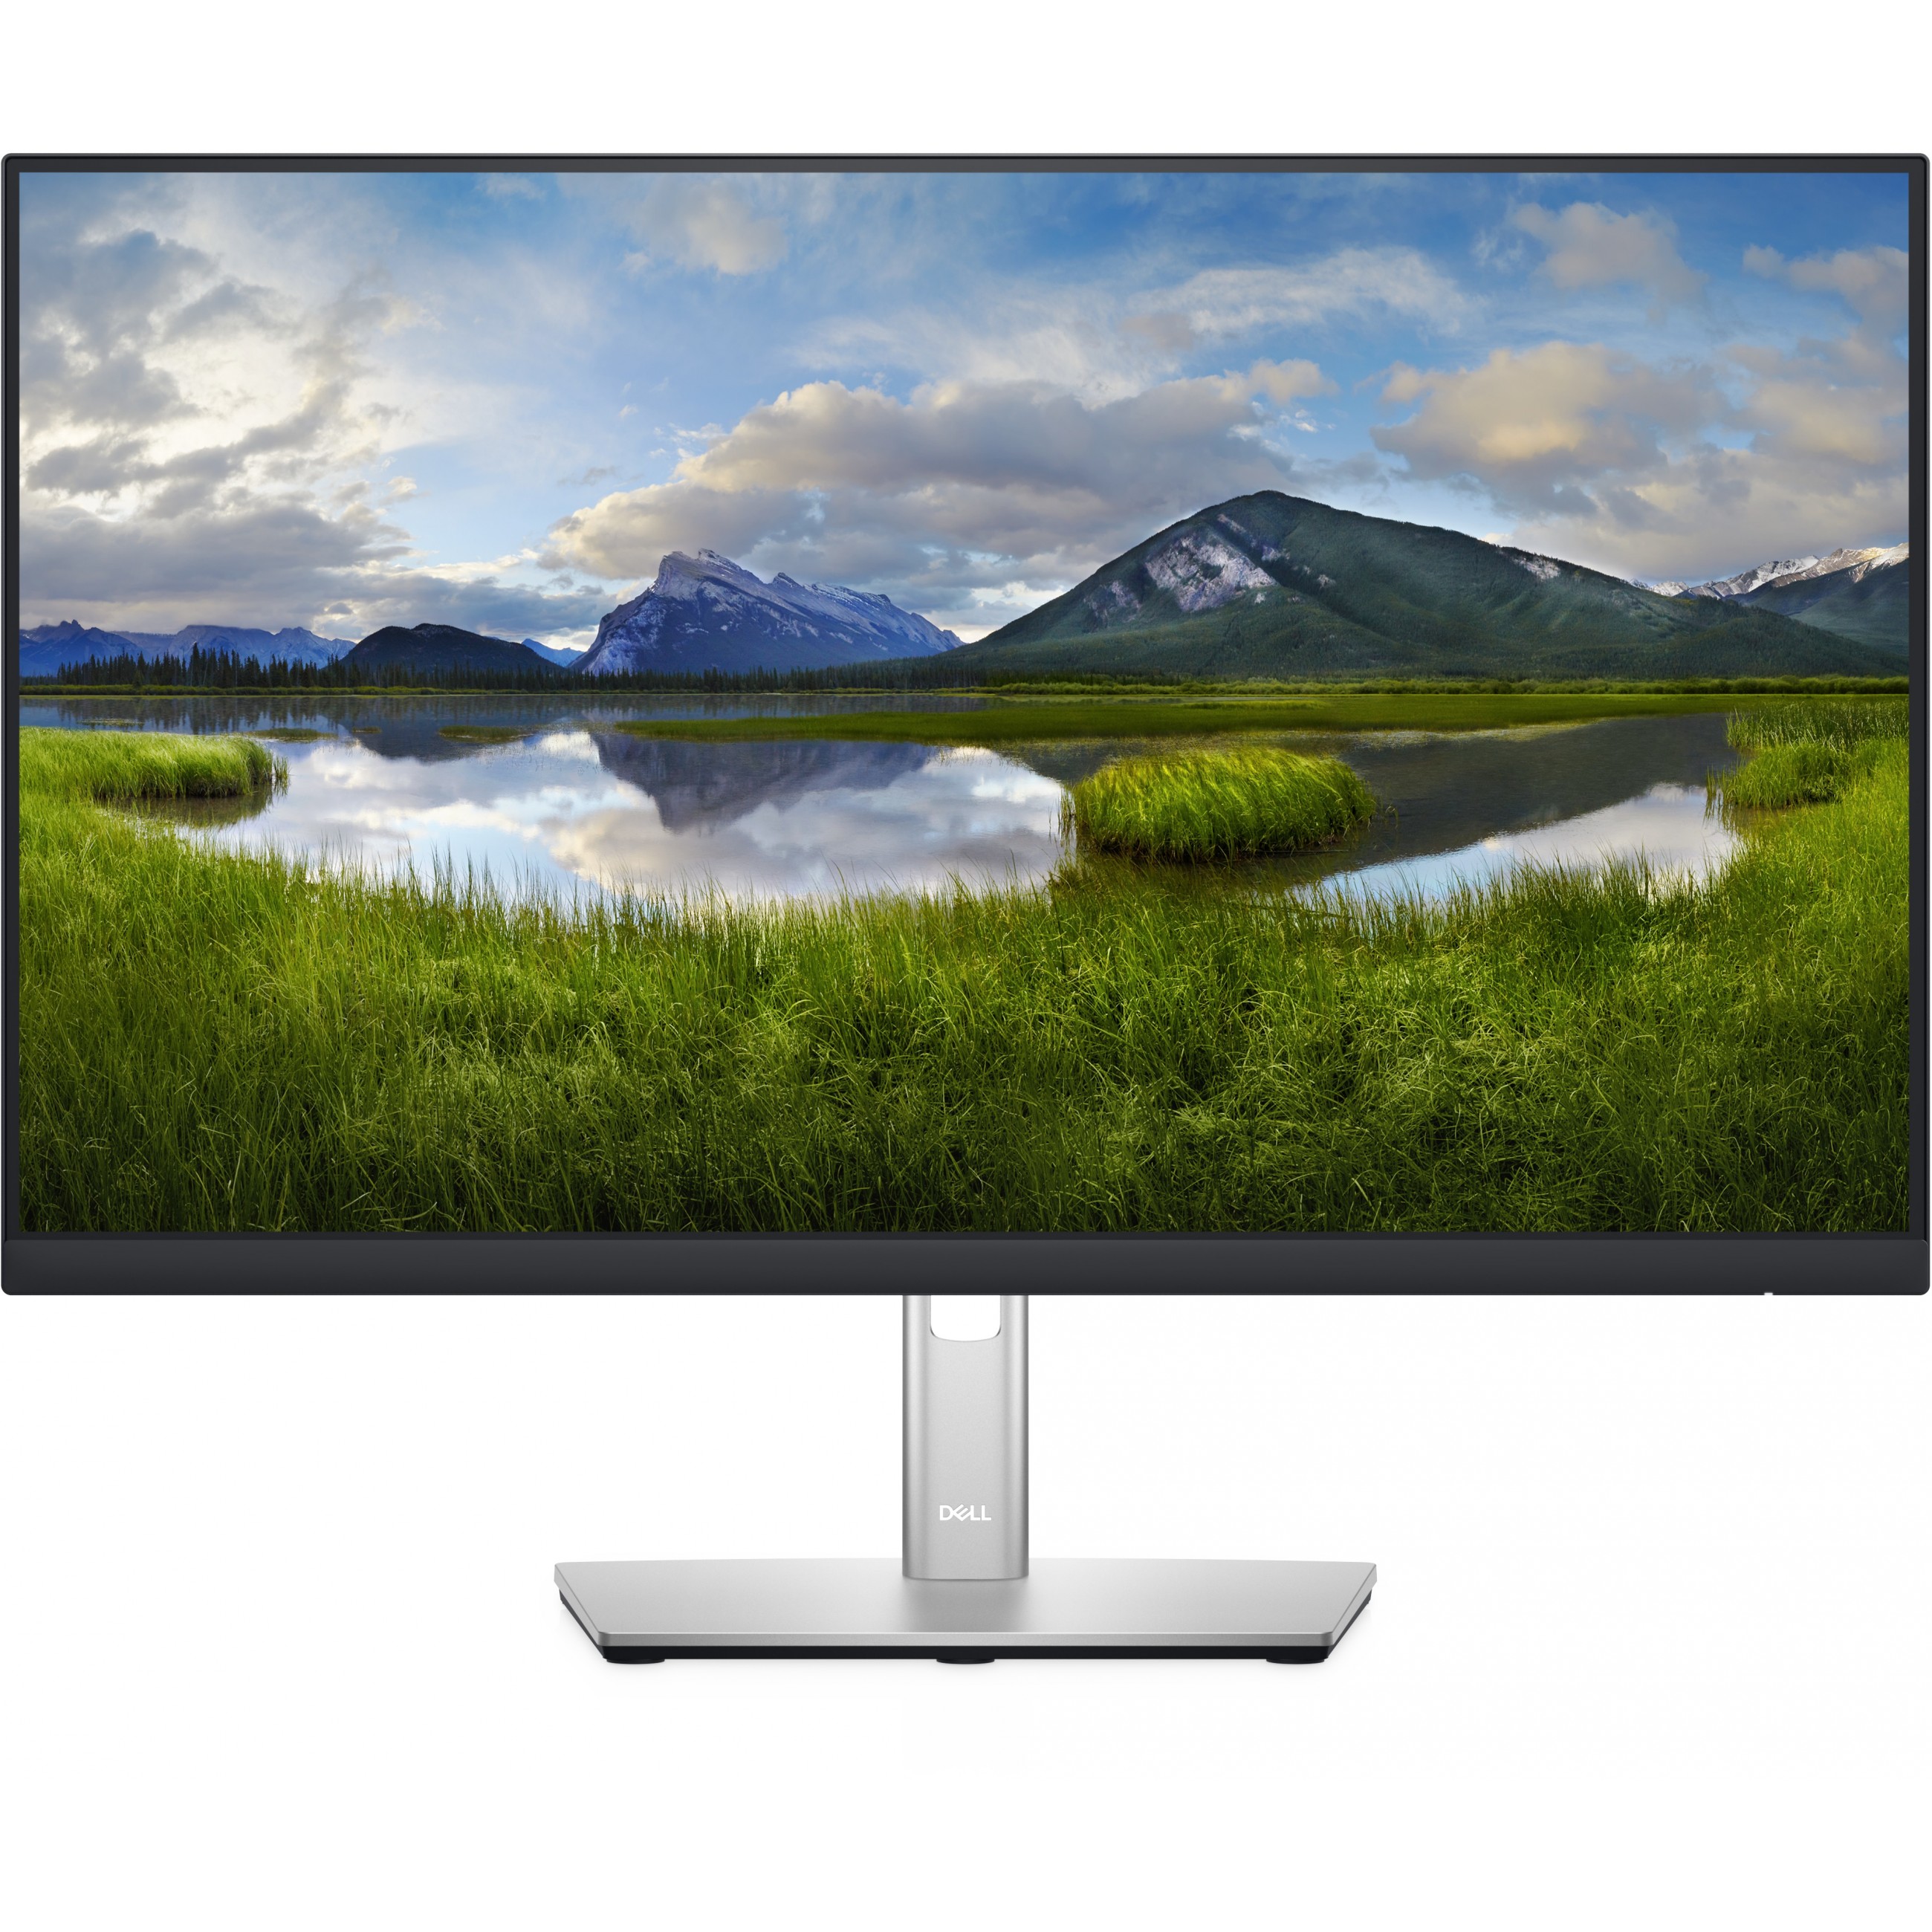 DELL P Series P2422H LED display - DELL-P2422H